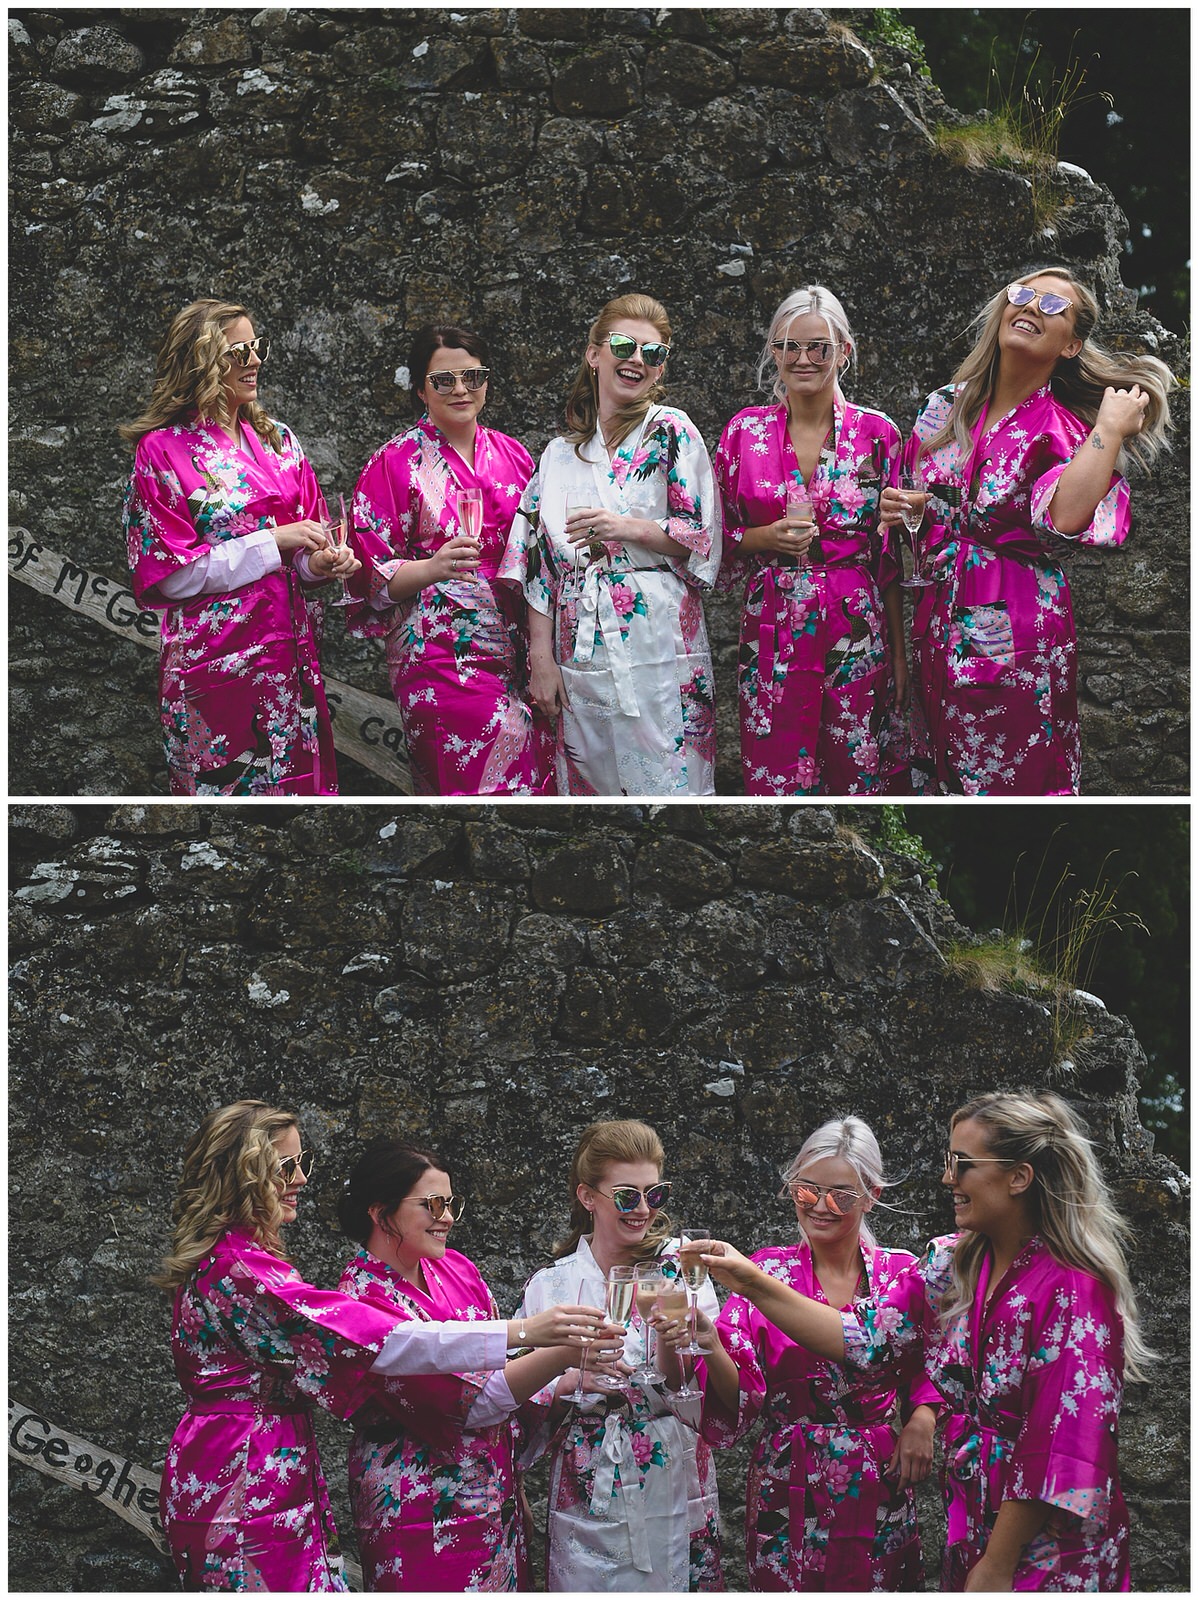 Bridesmaid and bridal party portrait in stylish sunglasses and dressing gowns